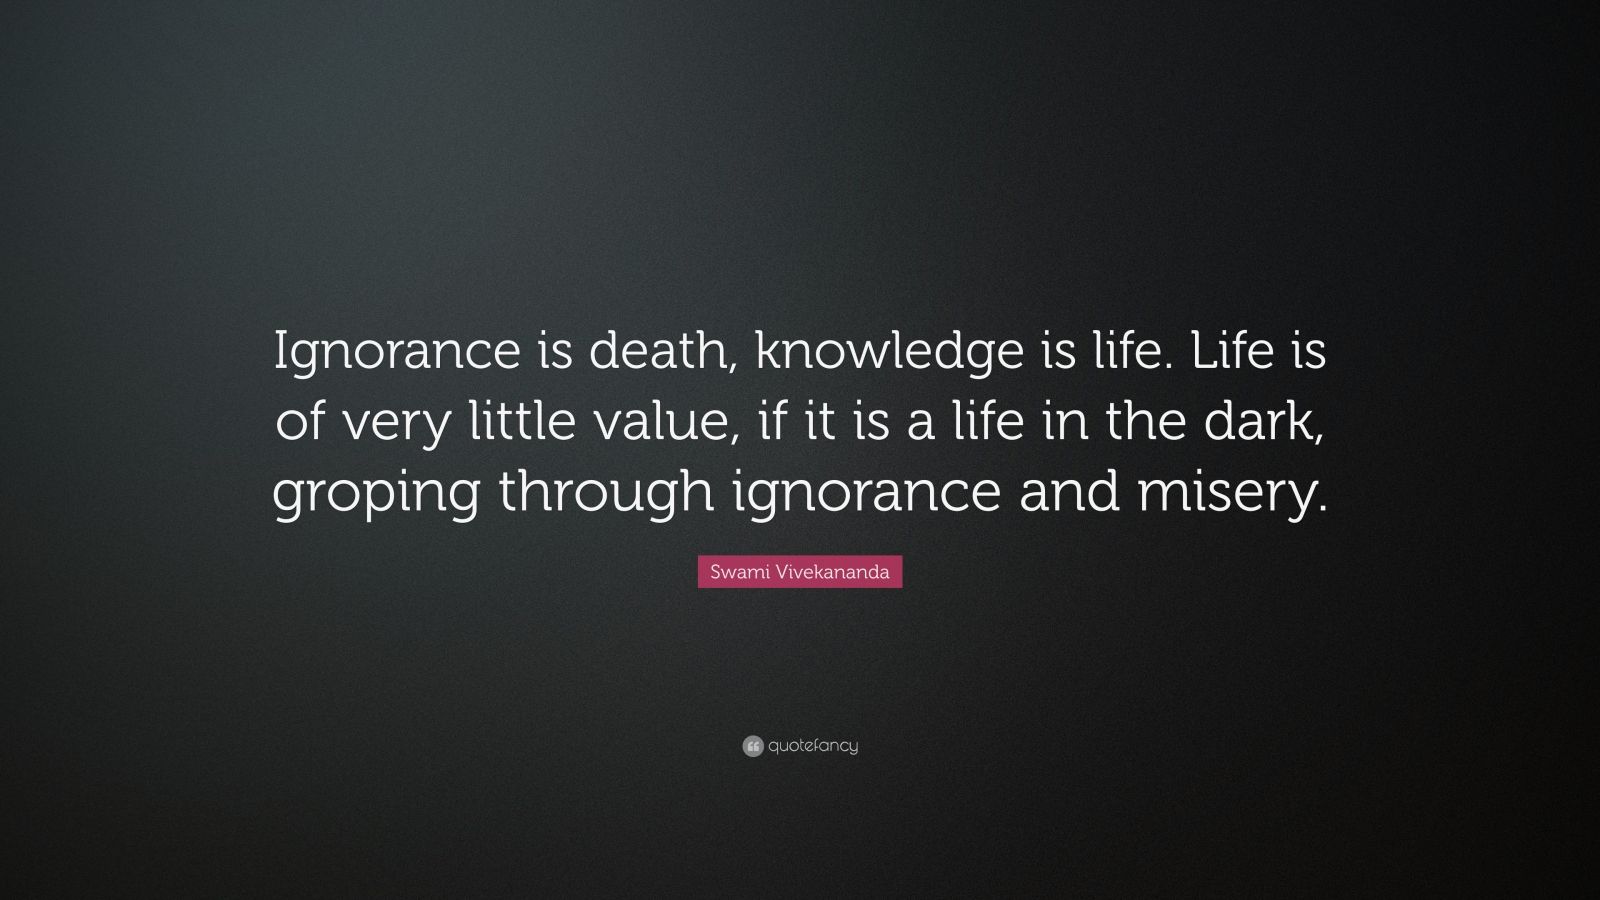 Swami Vivekananda Quote: “Ignorance is death, knowledge is life. Life ...